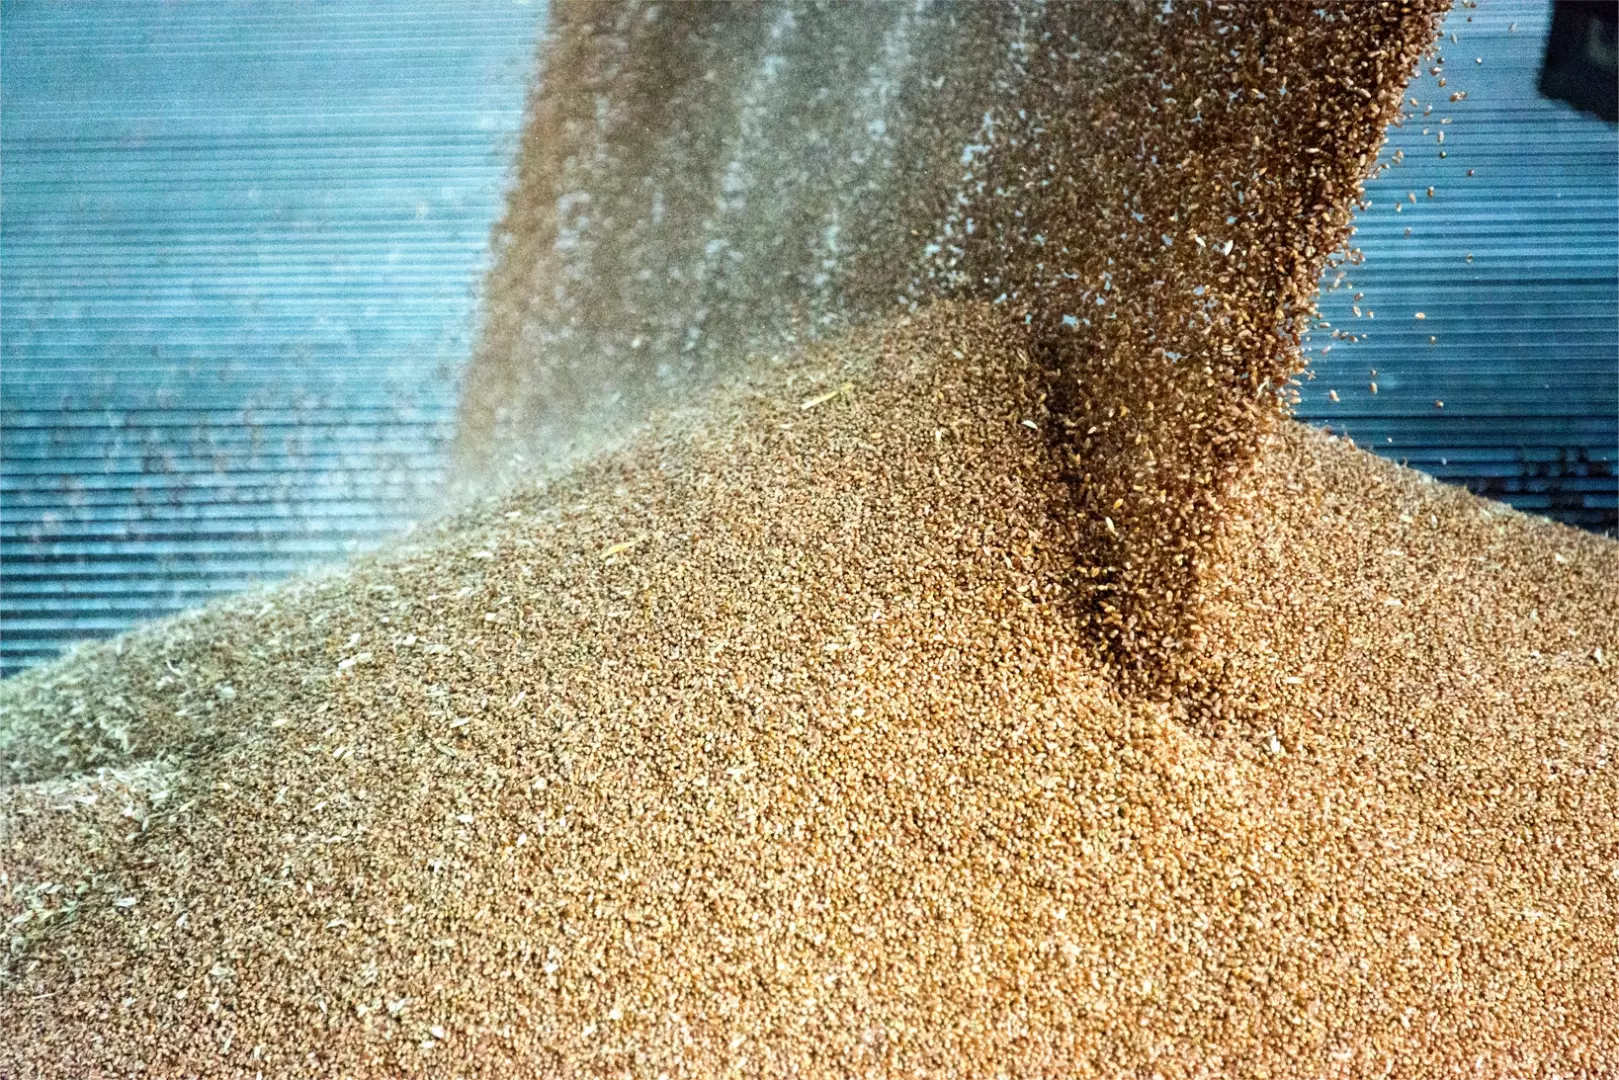 Grains cereal being delivered at a agricultural silo for storage and drying